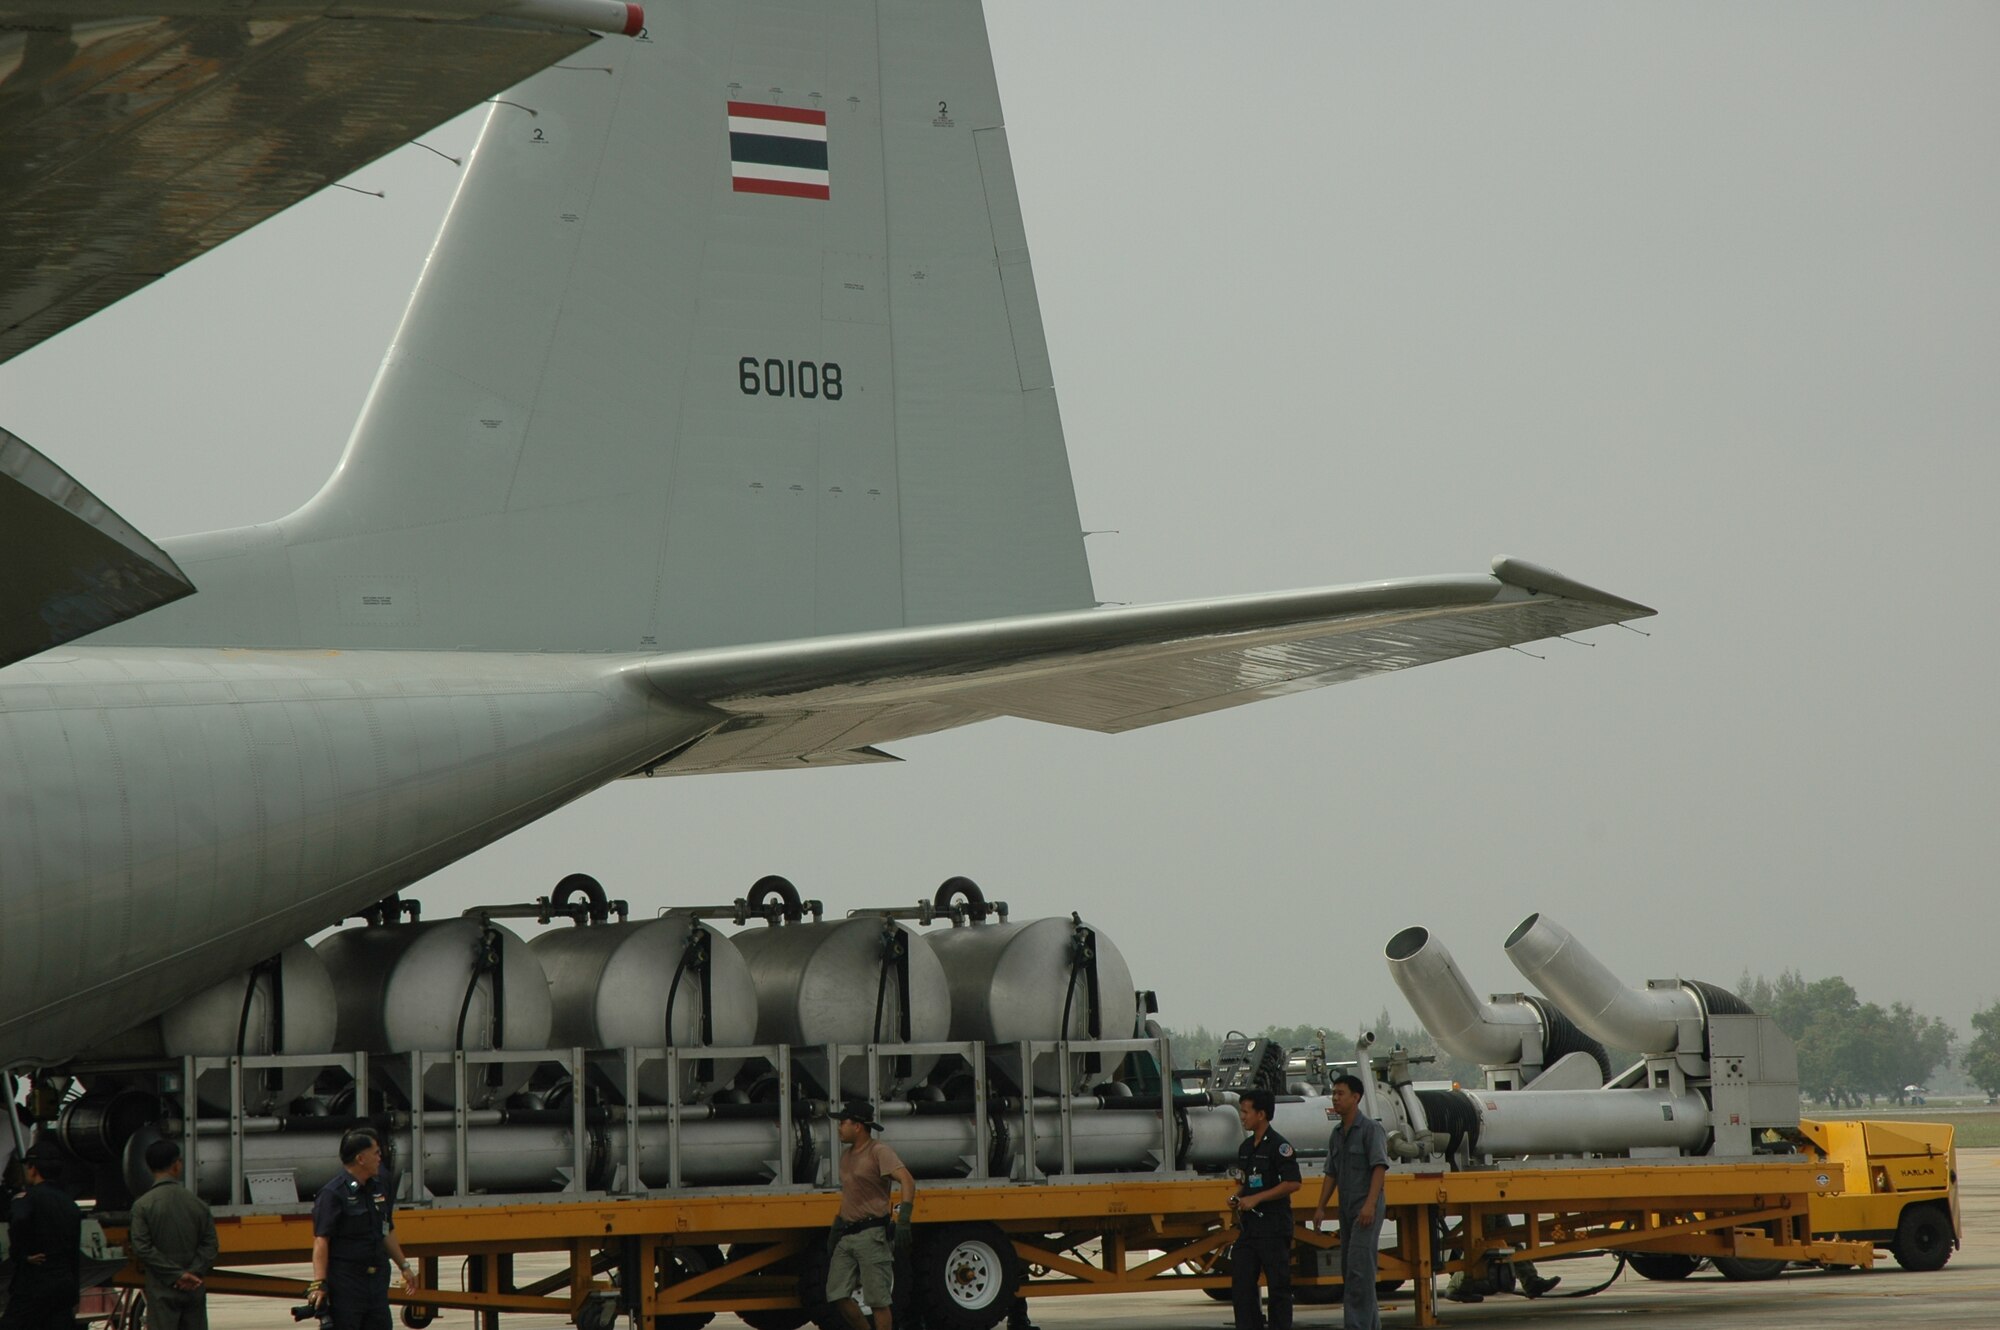 A Modular Airborne Firefighting System is loaded onto a Royal Thai Air Force C-130 with help from U.S. Air Force Reserve Airmen at Don Muang Royal Thai Air Force Base, Thailand.  The MAFFS system was transported from Don Muang RTAFB to Phitsanulok RTAFB for MAFFS flying training.  Seven members of the Air Force Reserve’s 302nd Airlift Wing traveled to Thailand to provide expert training to RTAF members on safe and effective Modular Airborne Firefighting System operations.  This event marks the first time the Air Force Reserve has sent delegates to train a foreign Air Force on use of the MAFFS equipment. (U.S. Air Force photo/Capt. Jody L. Ritchie)